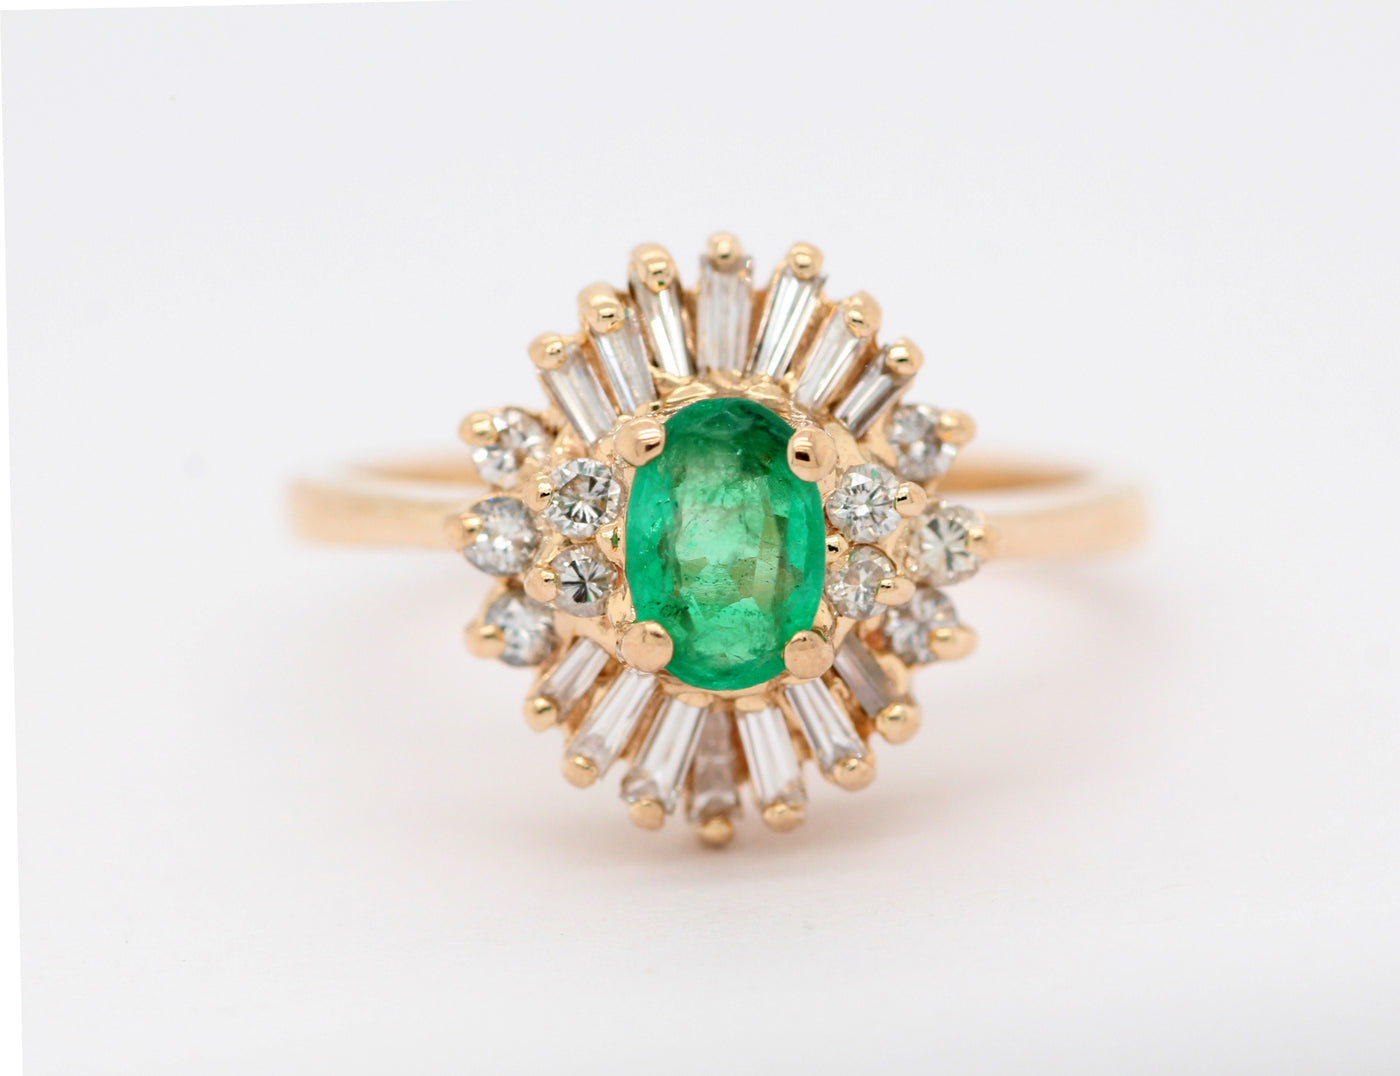 ESTATE 14KY .60 CT EMERALD AND DIAMOND RING, .39 CTTW